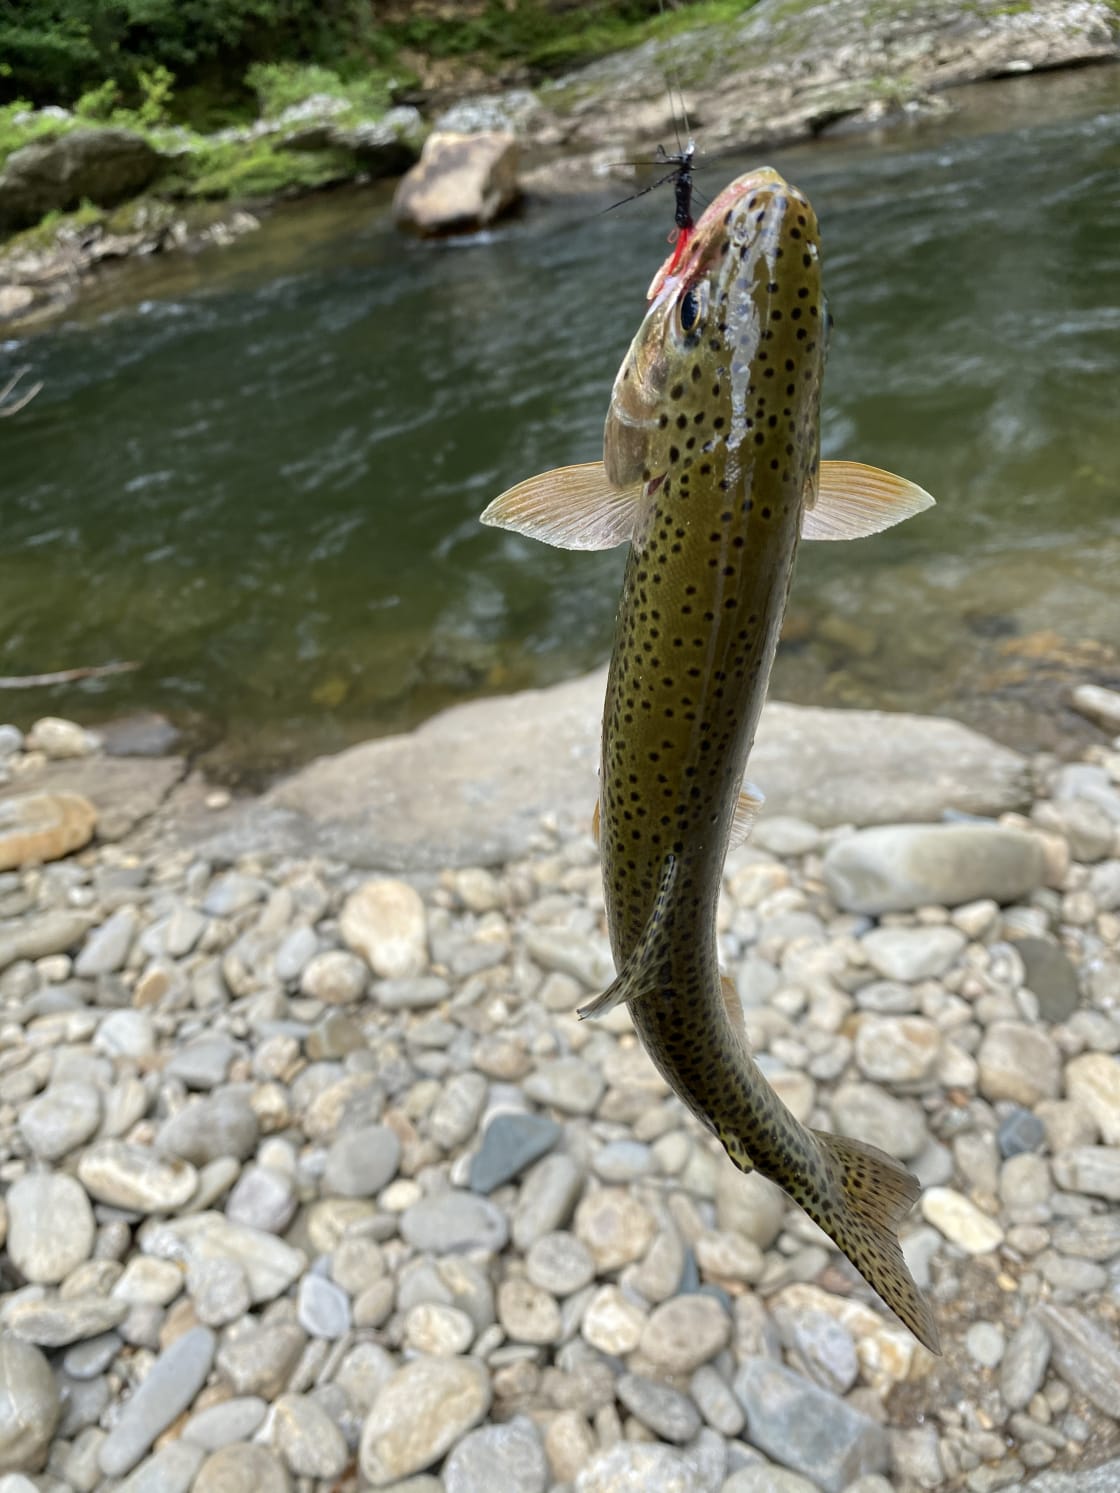 Caught 16 on dry flies and released.  